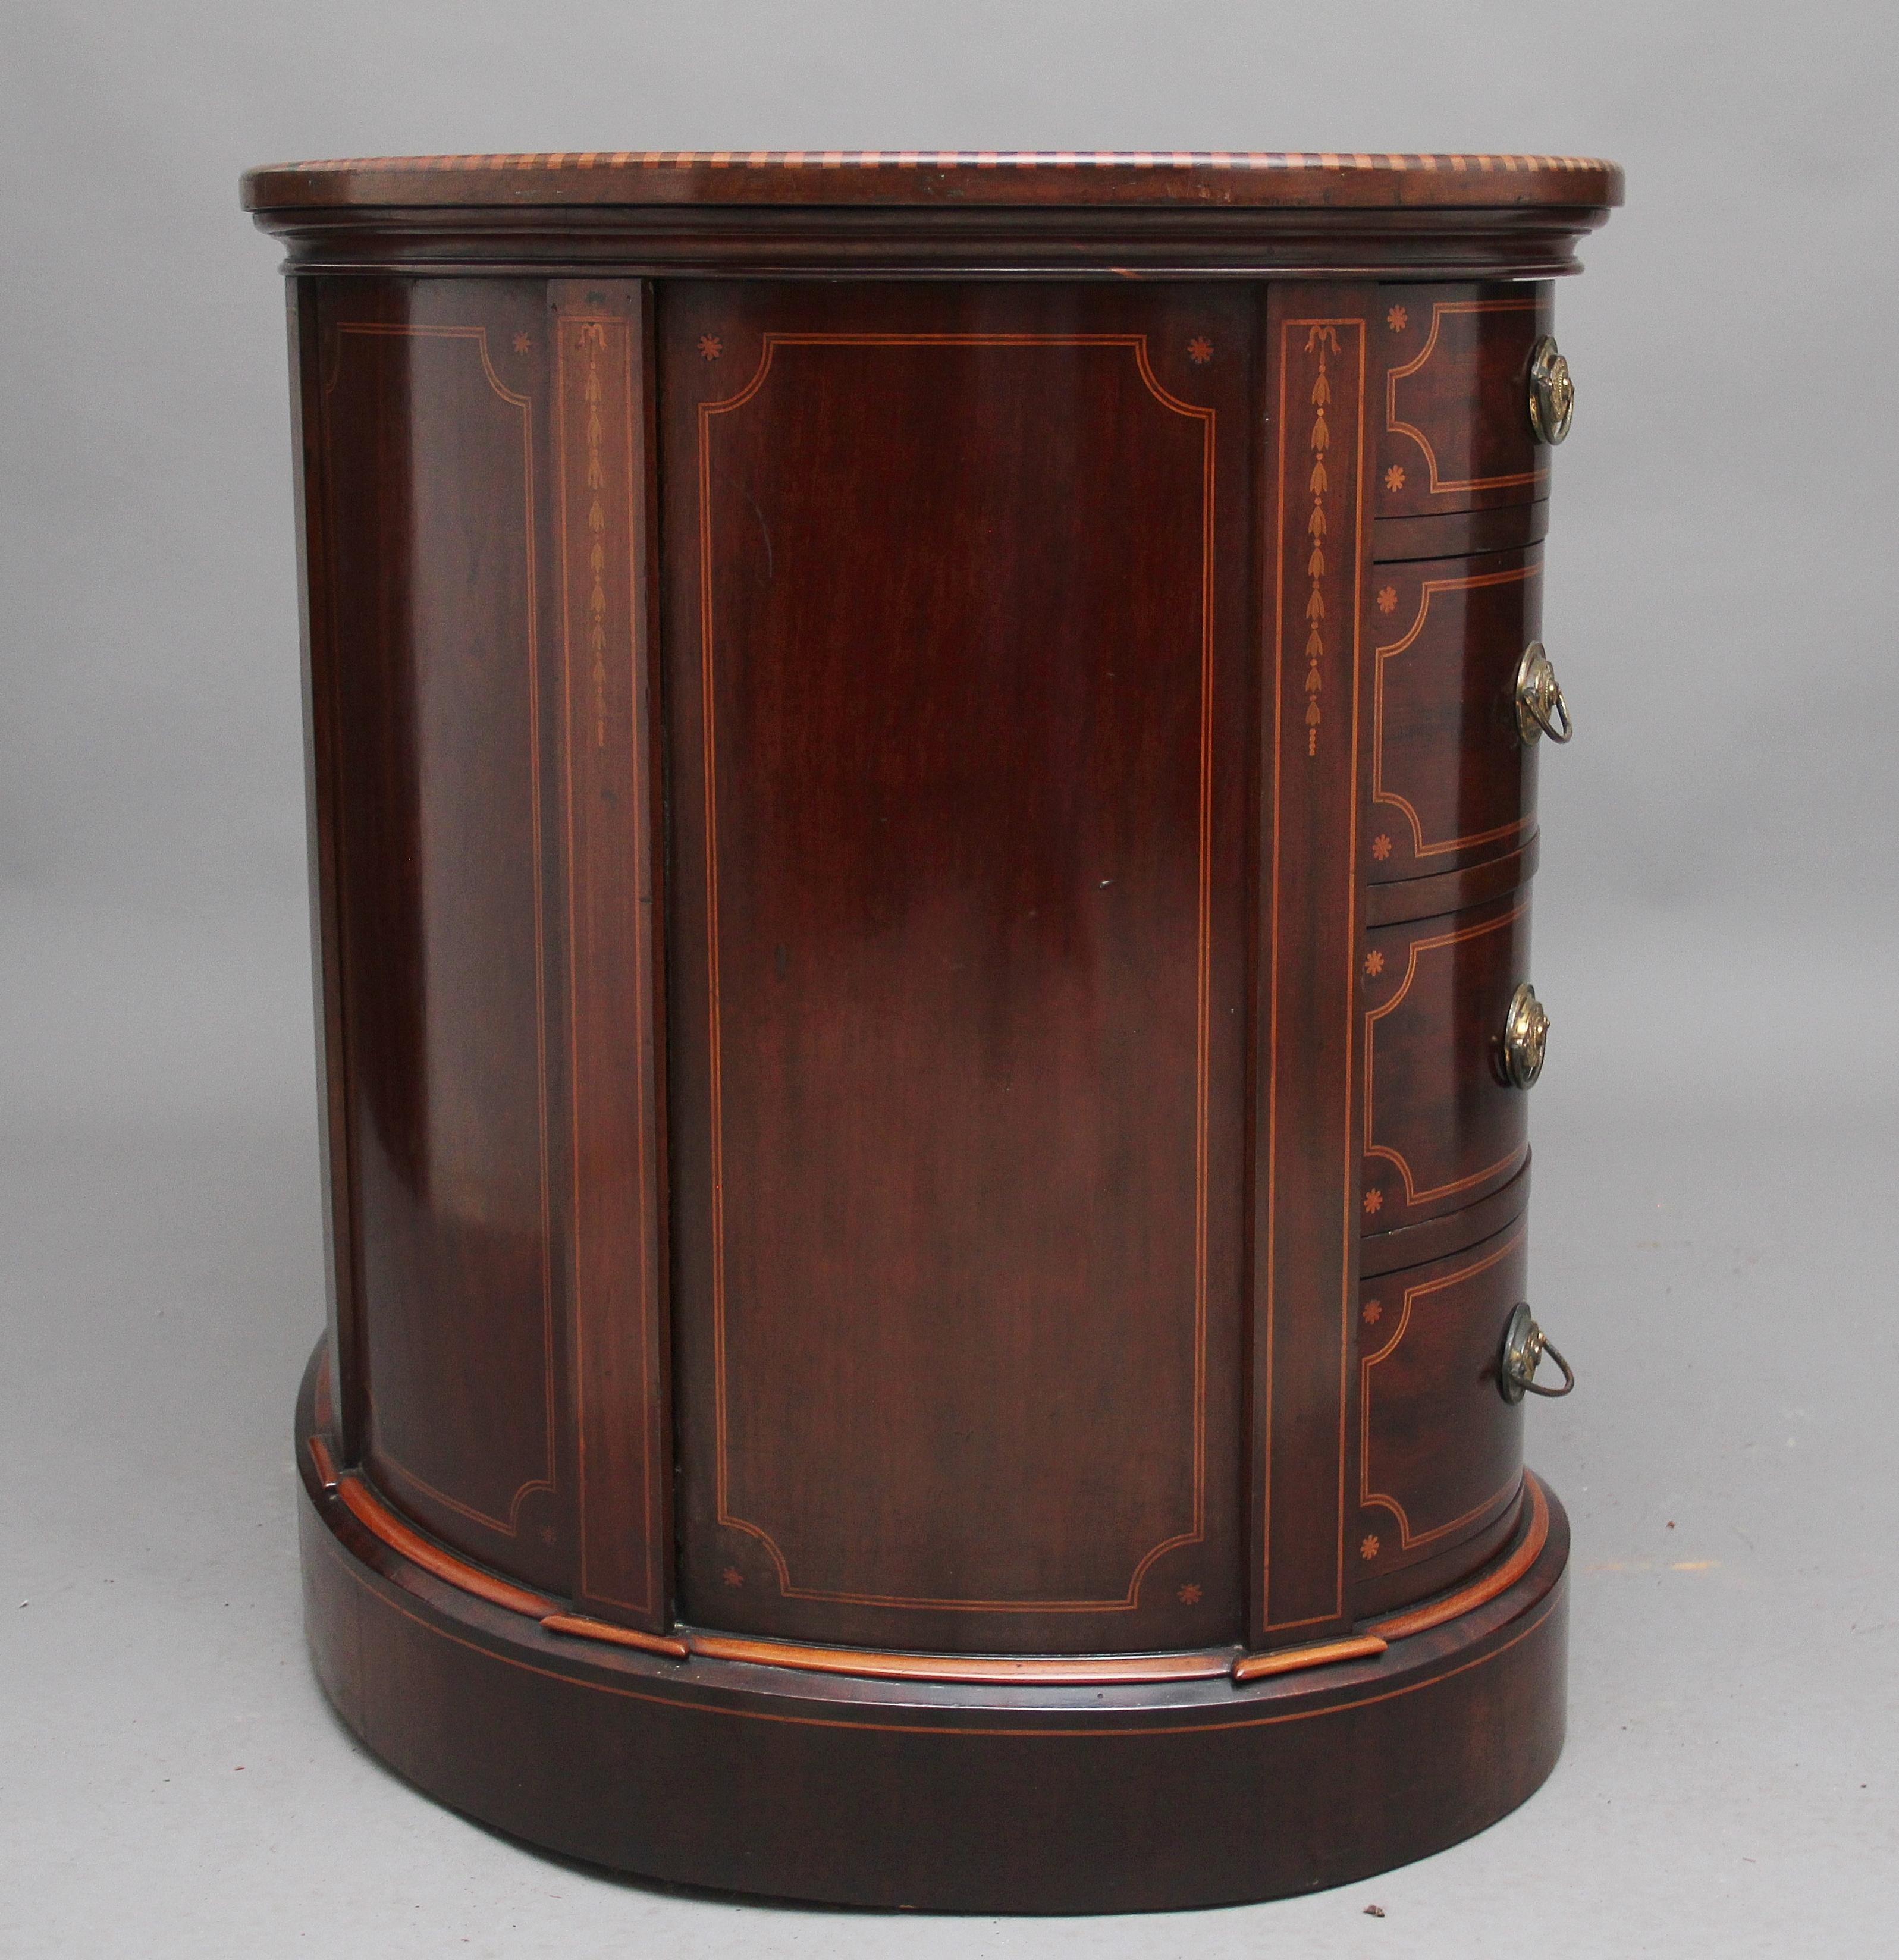 19th Century Inlaid Mahogany Kidney Shaped Desk with a Wonderful Provenance 2